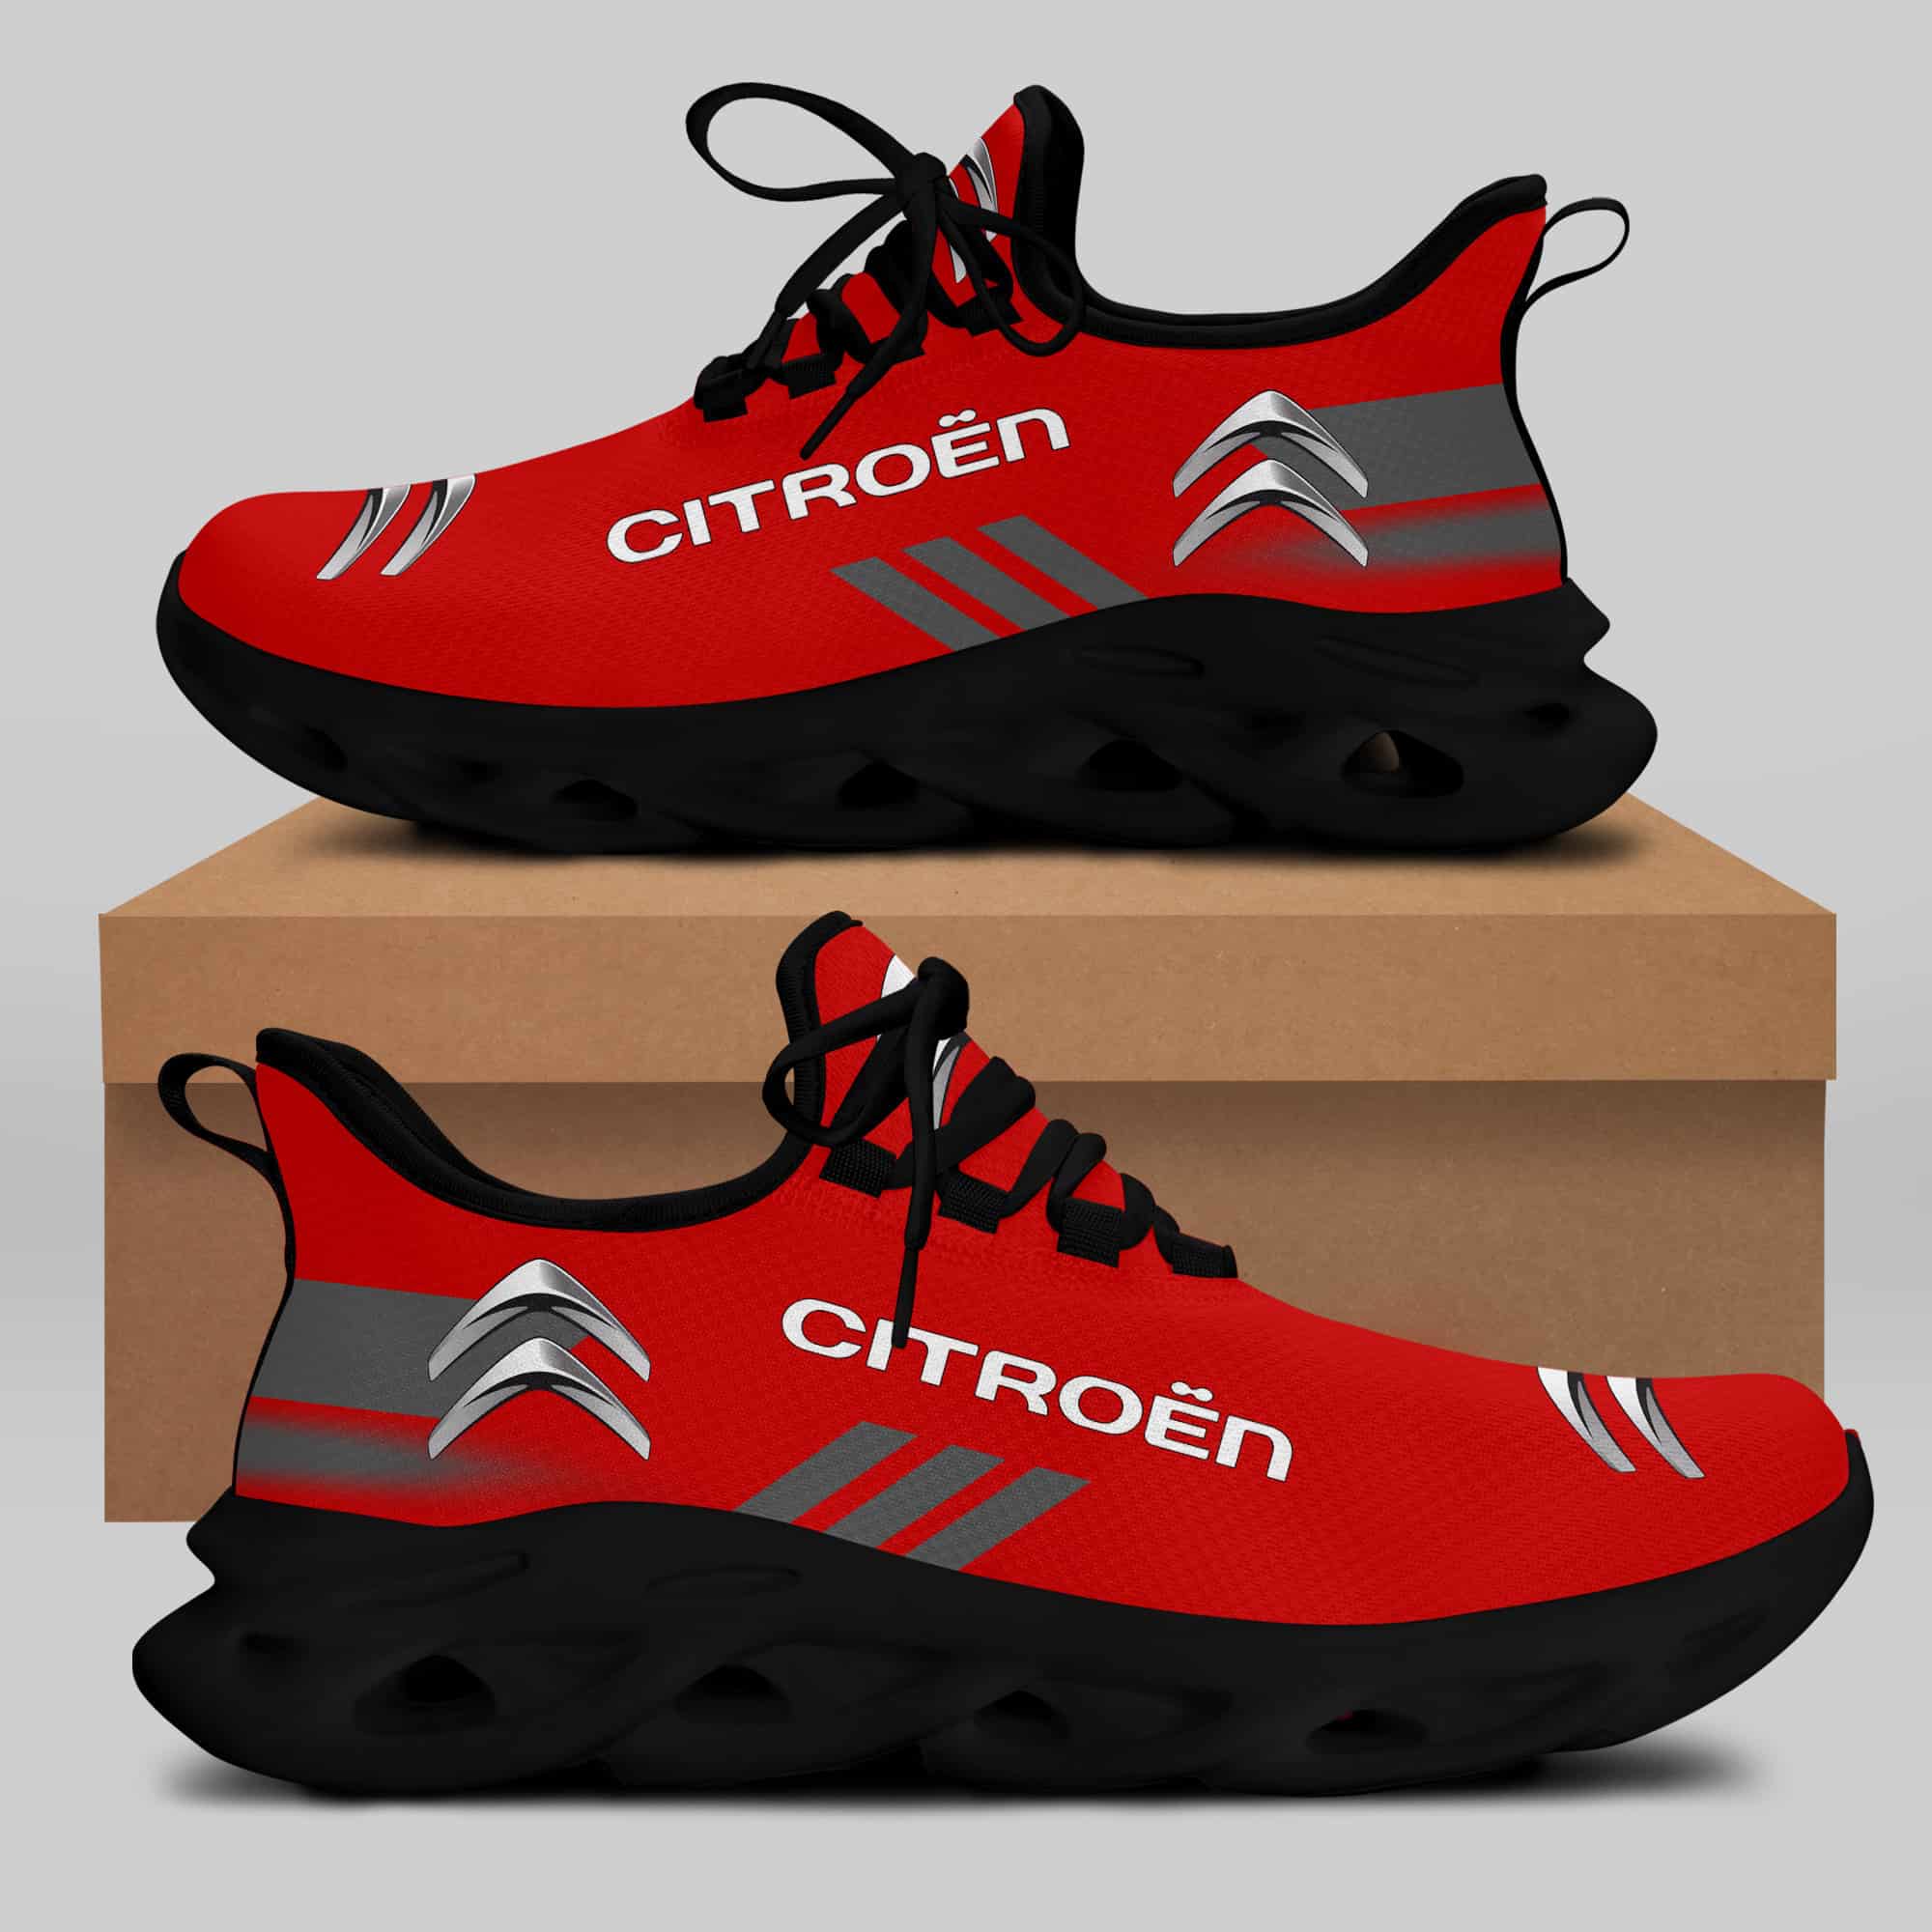 Citroën Running Shoes Max Soul Shoes Sneakers Ver 13 1